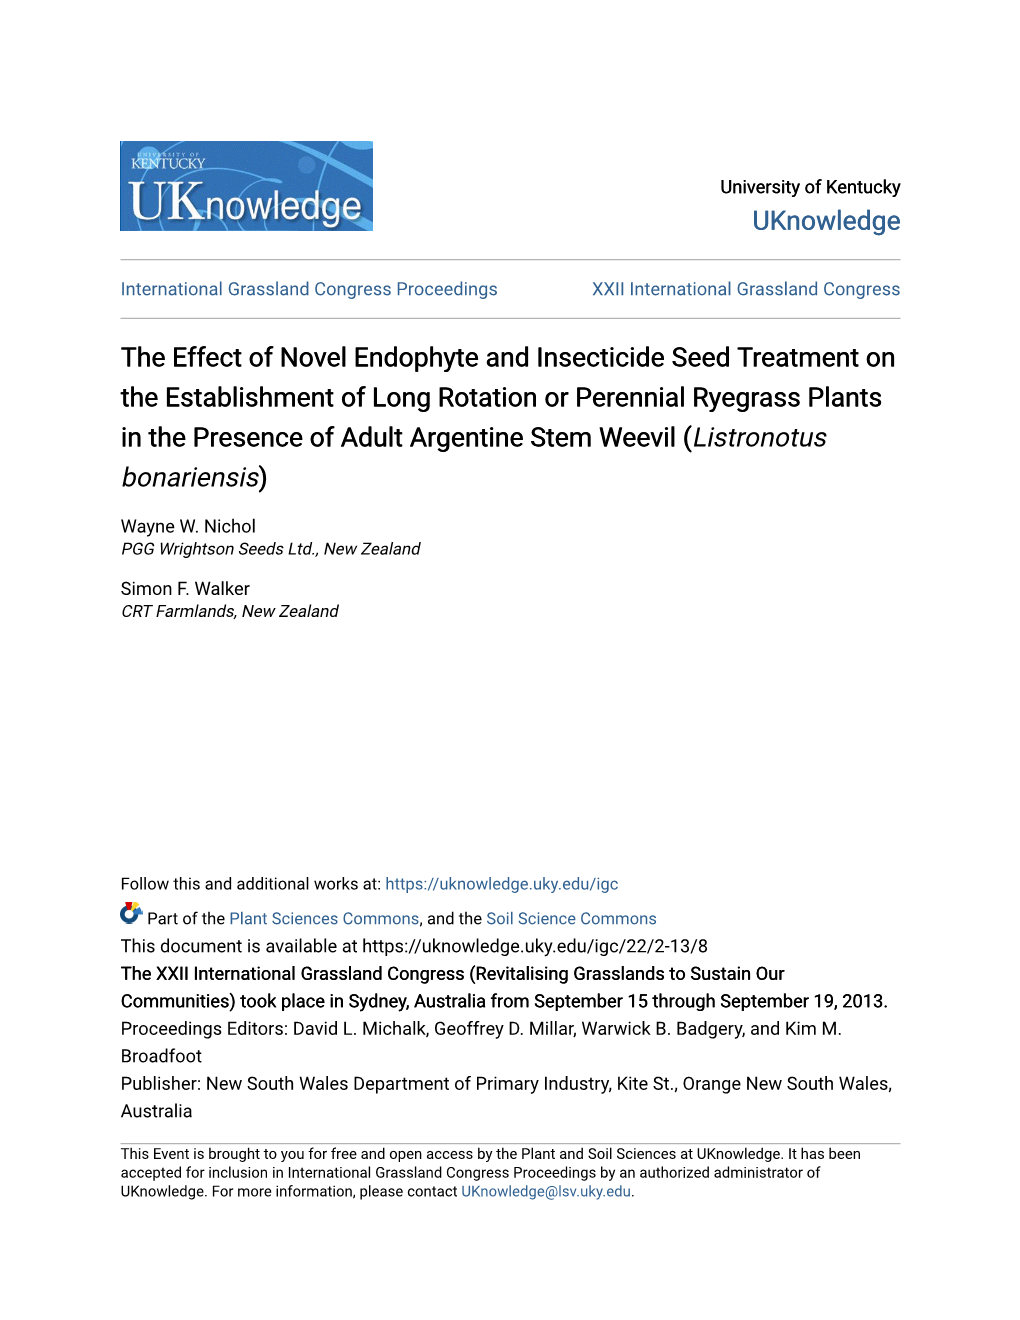 The Effect of Novel Endophyte and Insecticide Seed Treatment on The